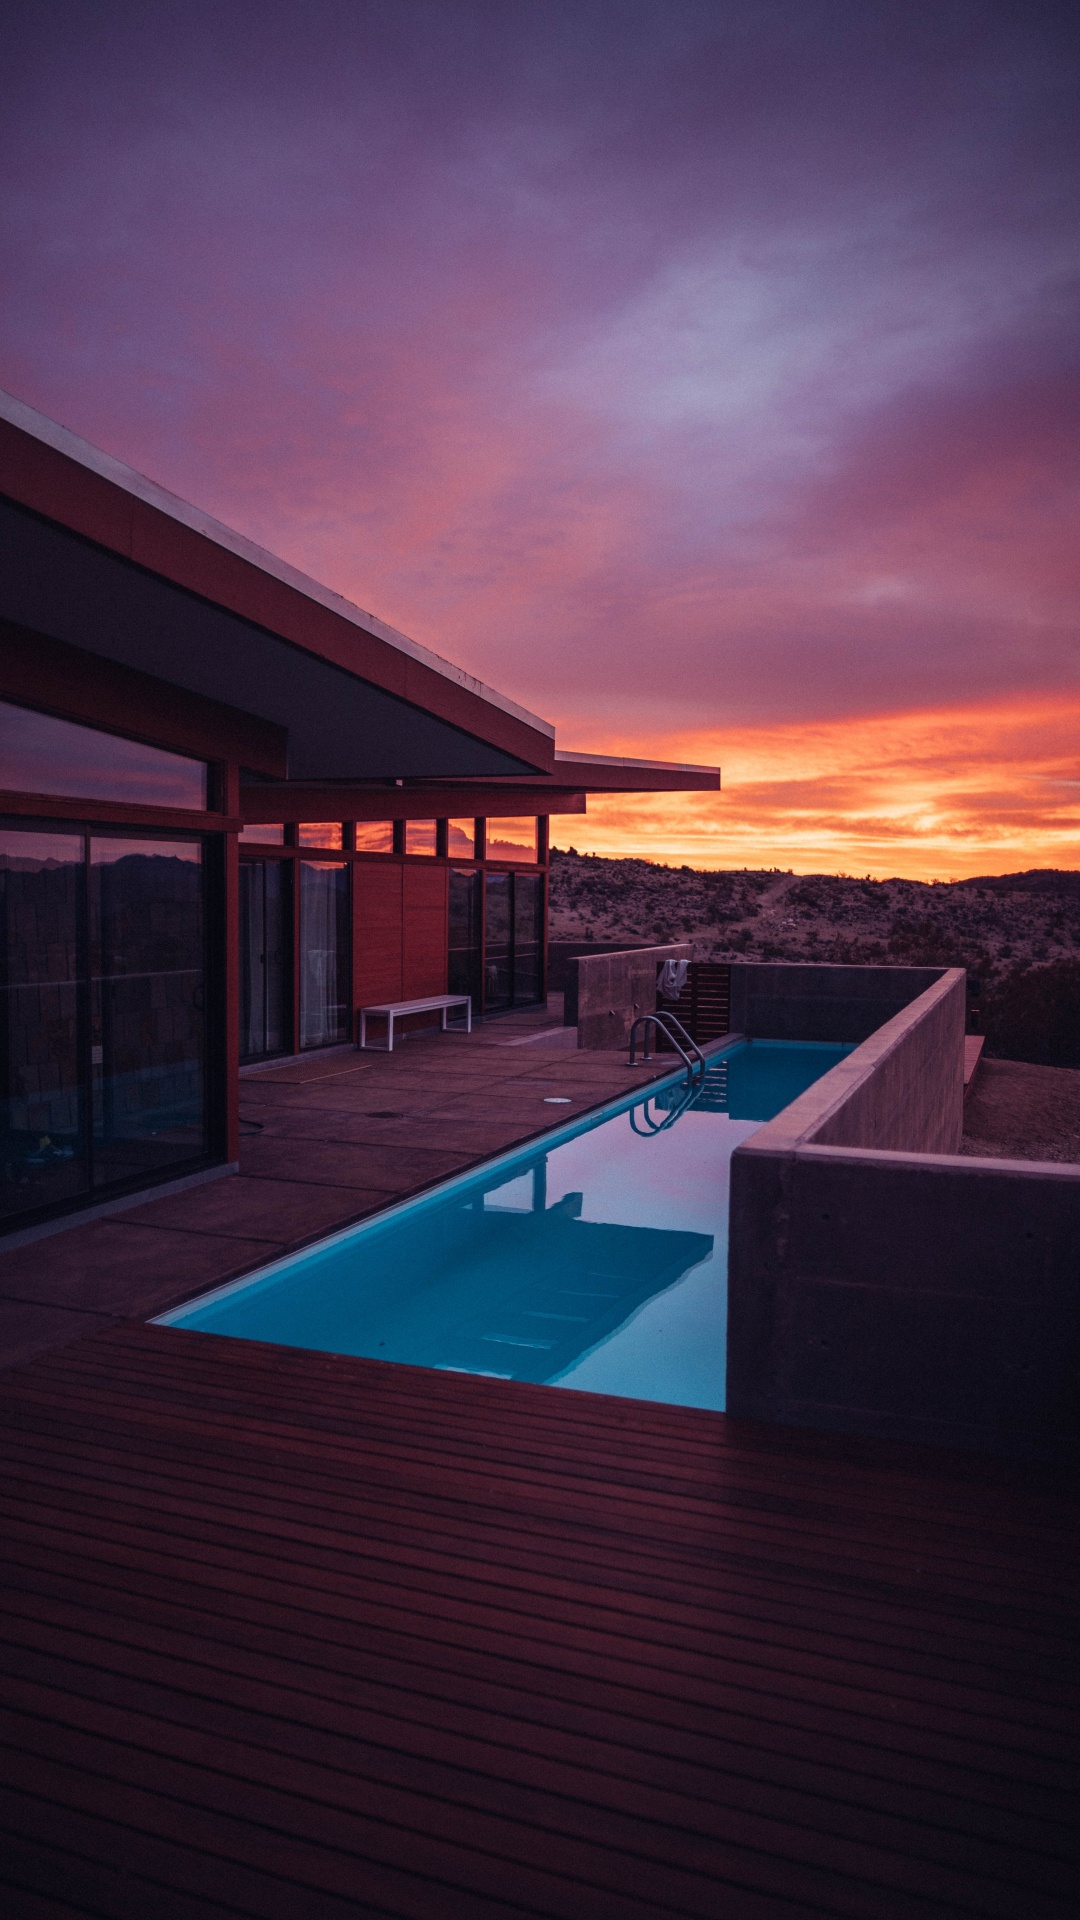 Swimming Pool Near Brown Wooden House During Sunset. Wallpaper in 1080x1920 Resolution